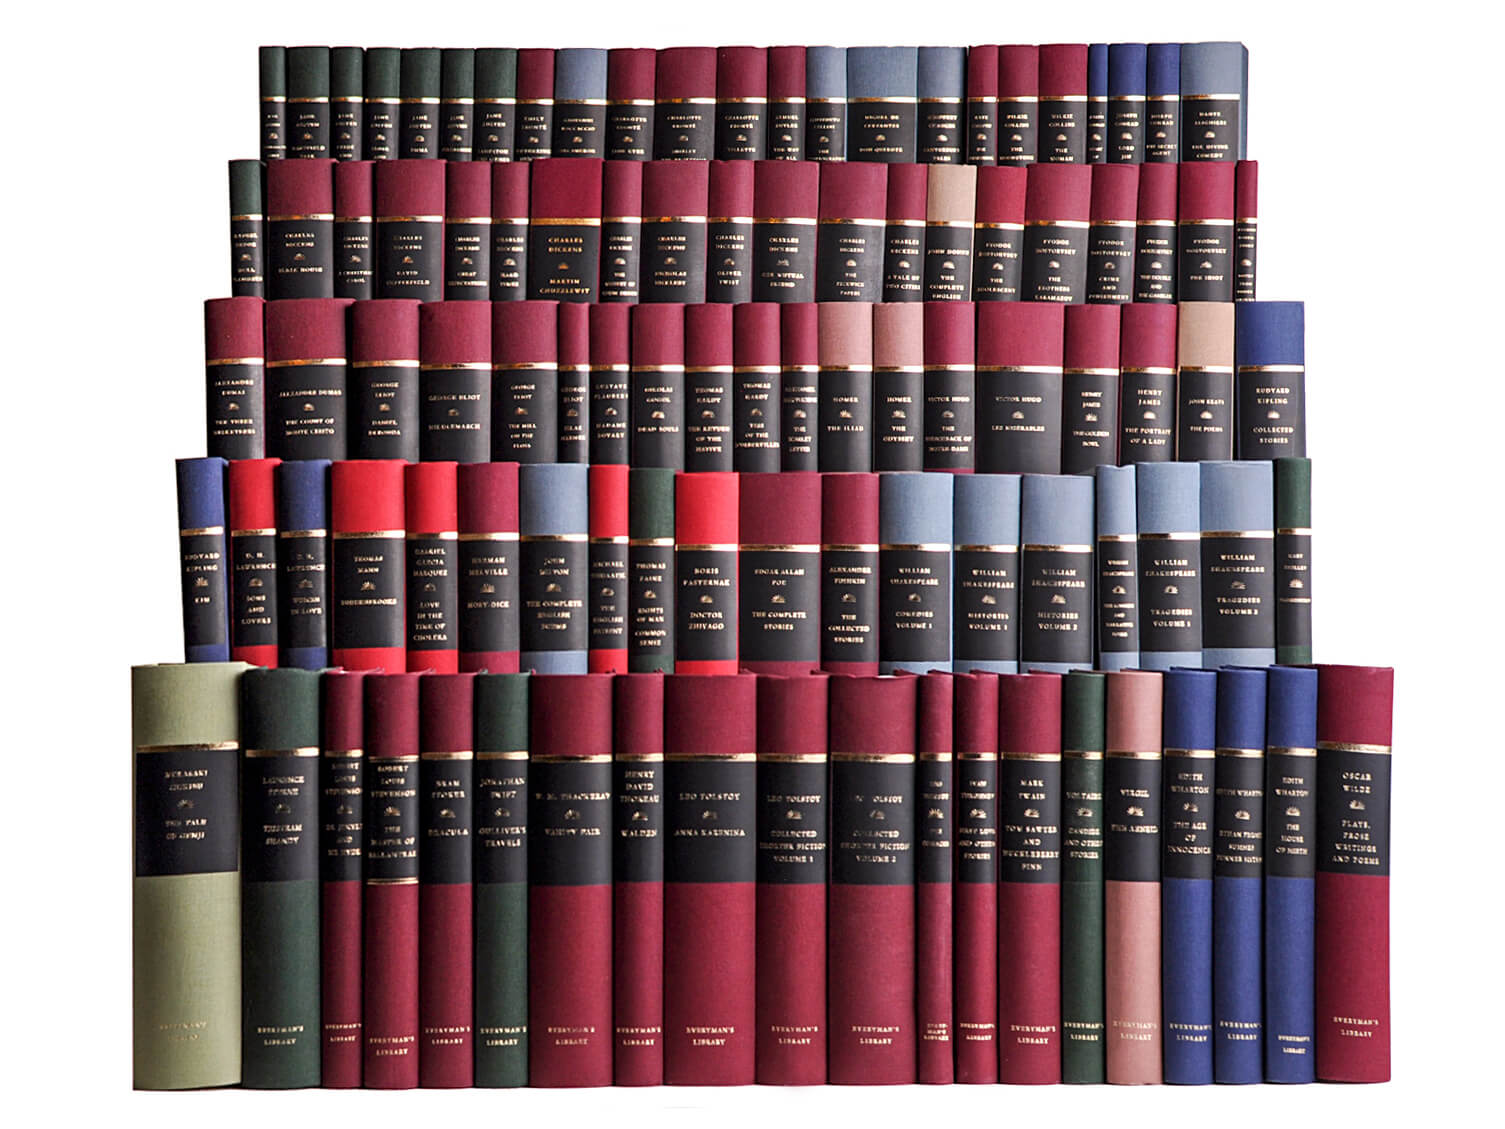 Juniper Custom set of 100 Books from Everyman's Library. Custom Curated Book Collections.